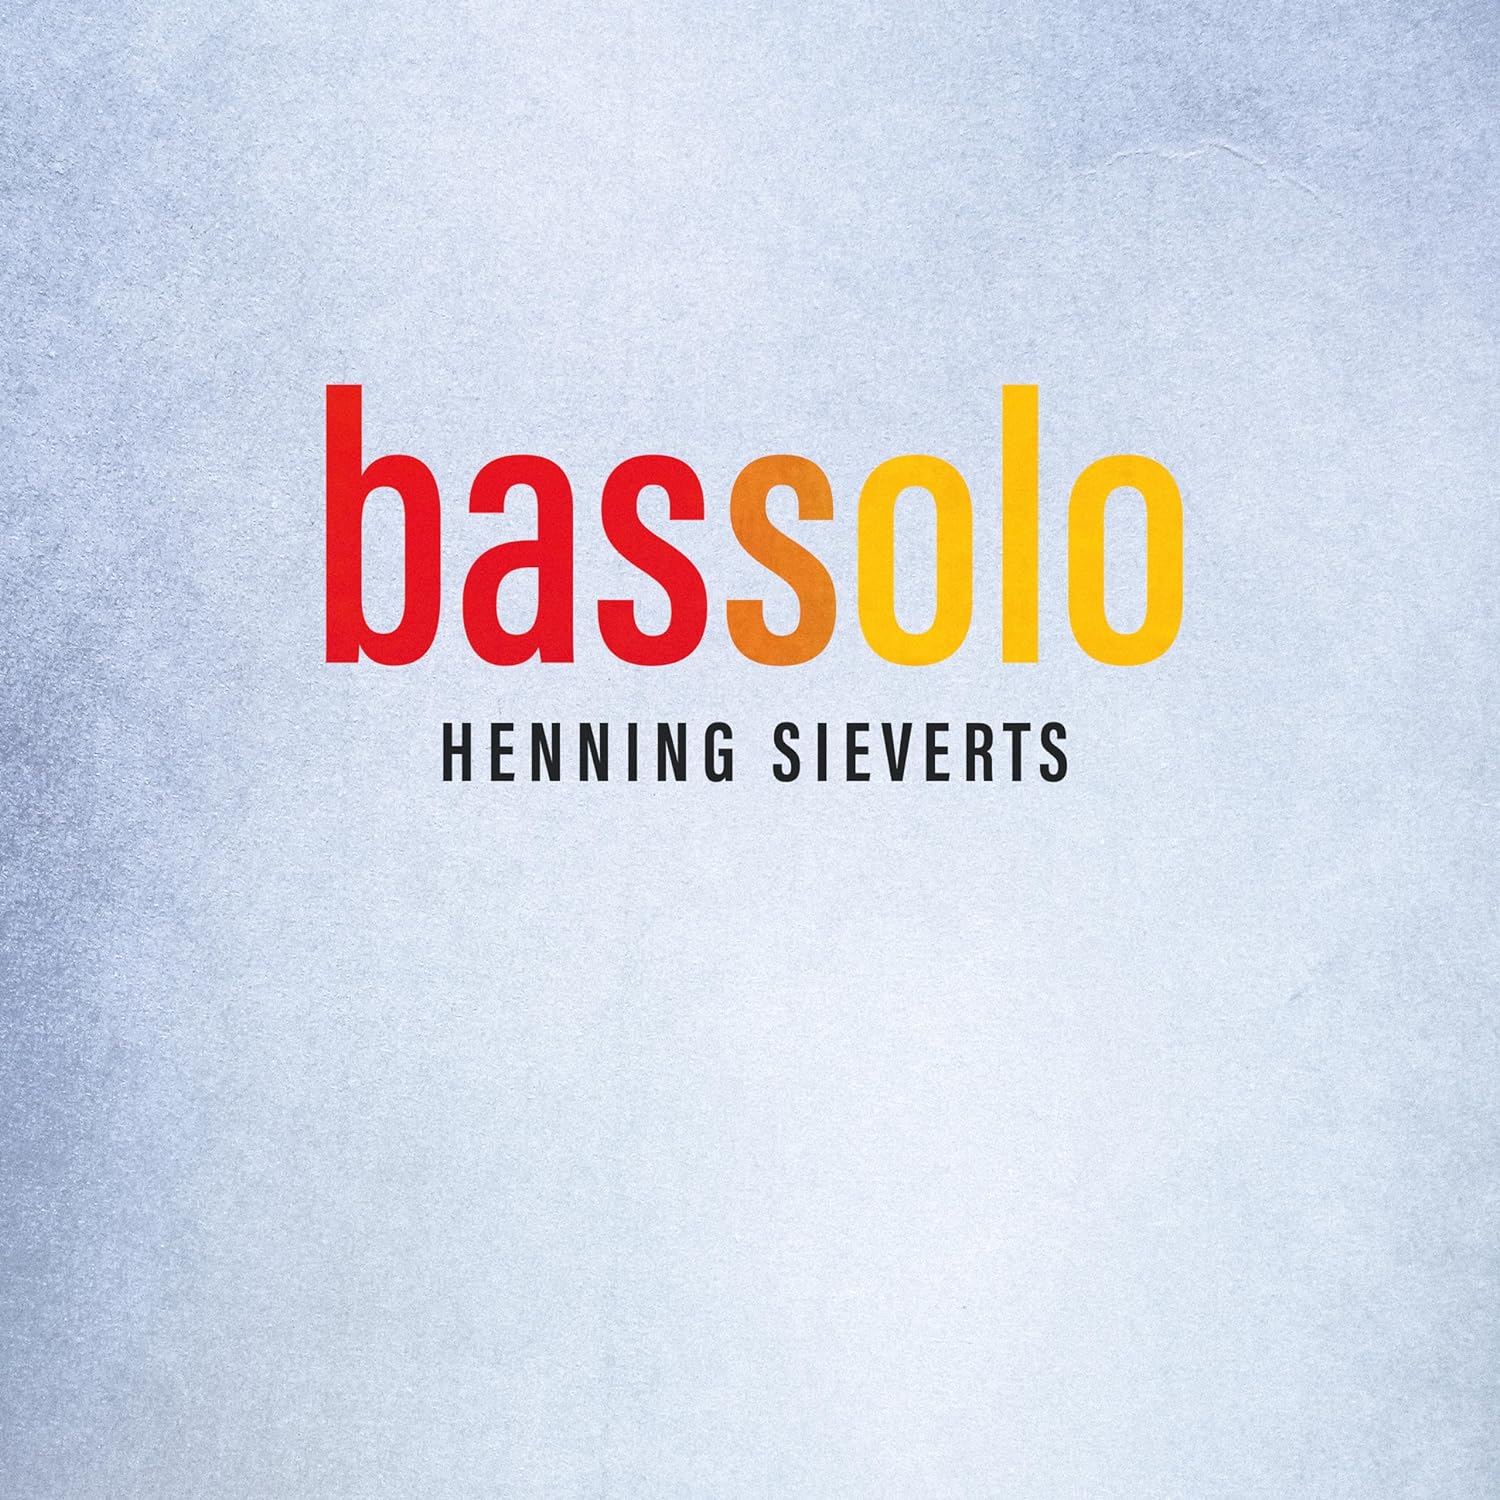 HENNING SIEVERTS - Bassolo cover 